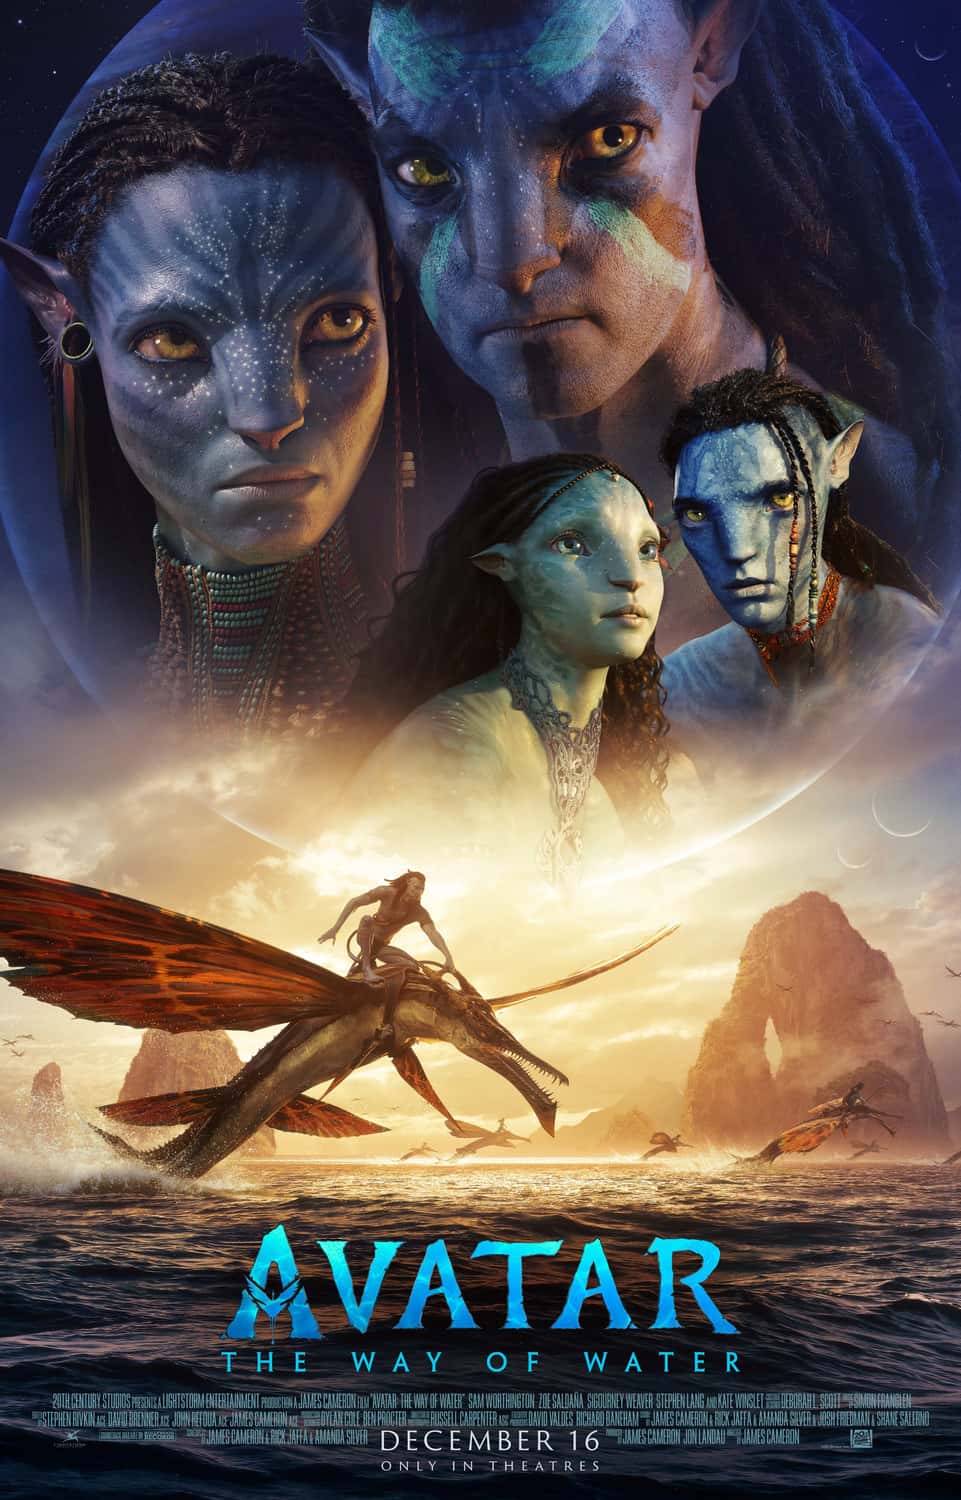 Global Box Office Weekend Report 6th - 8th January 2023: Avatar 2 stays at the top of the global box office for a fourth weekend with $177 Million